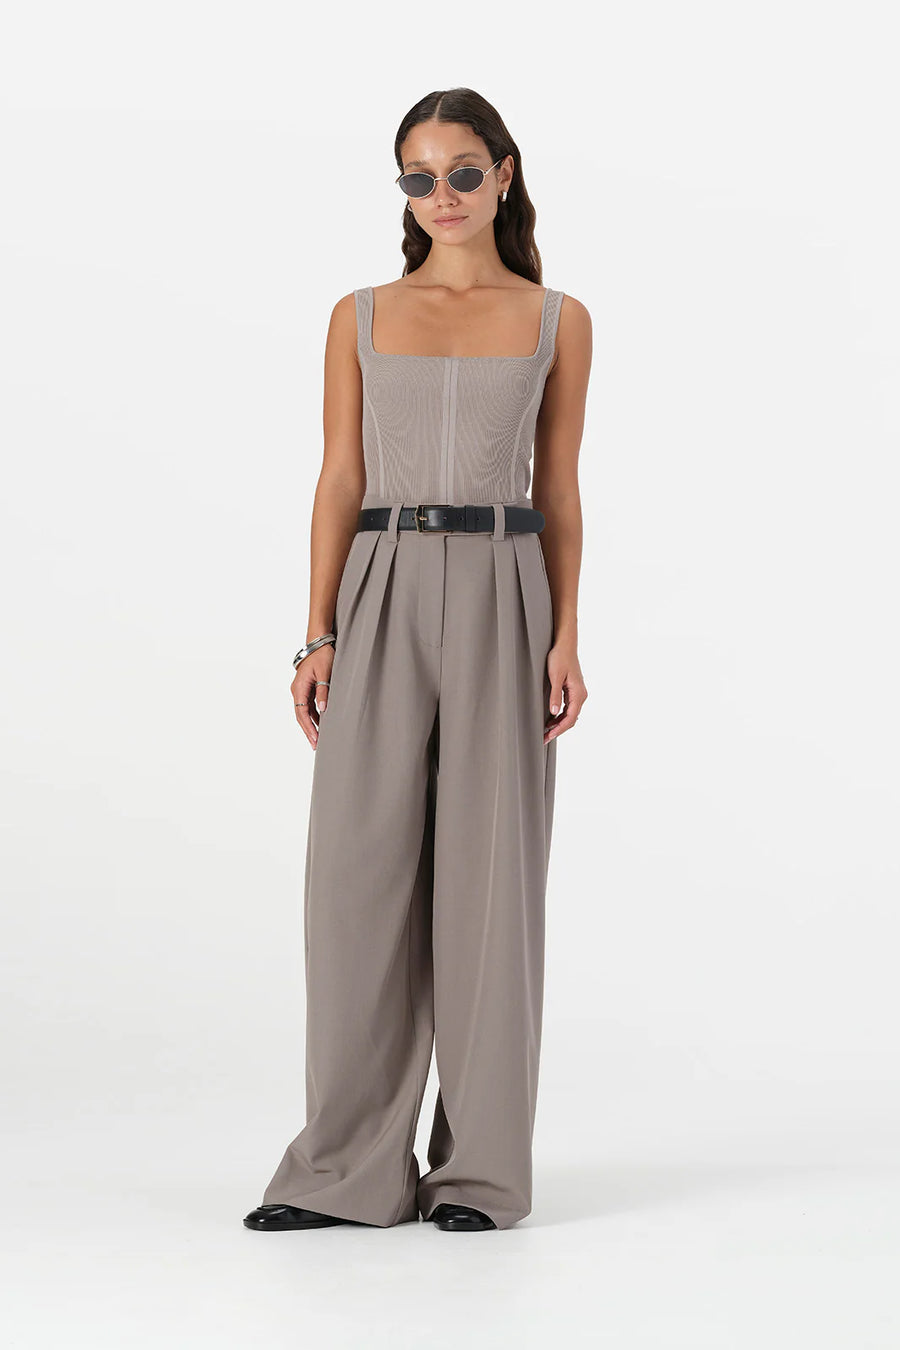 Elka Collective Kelsey Knit Top Stone